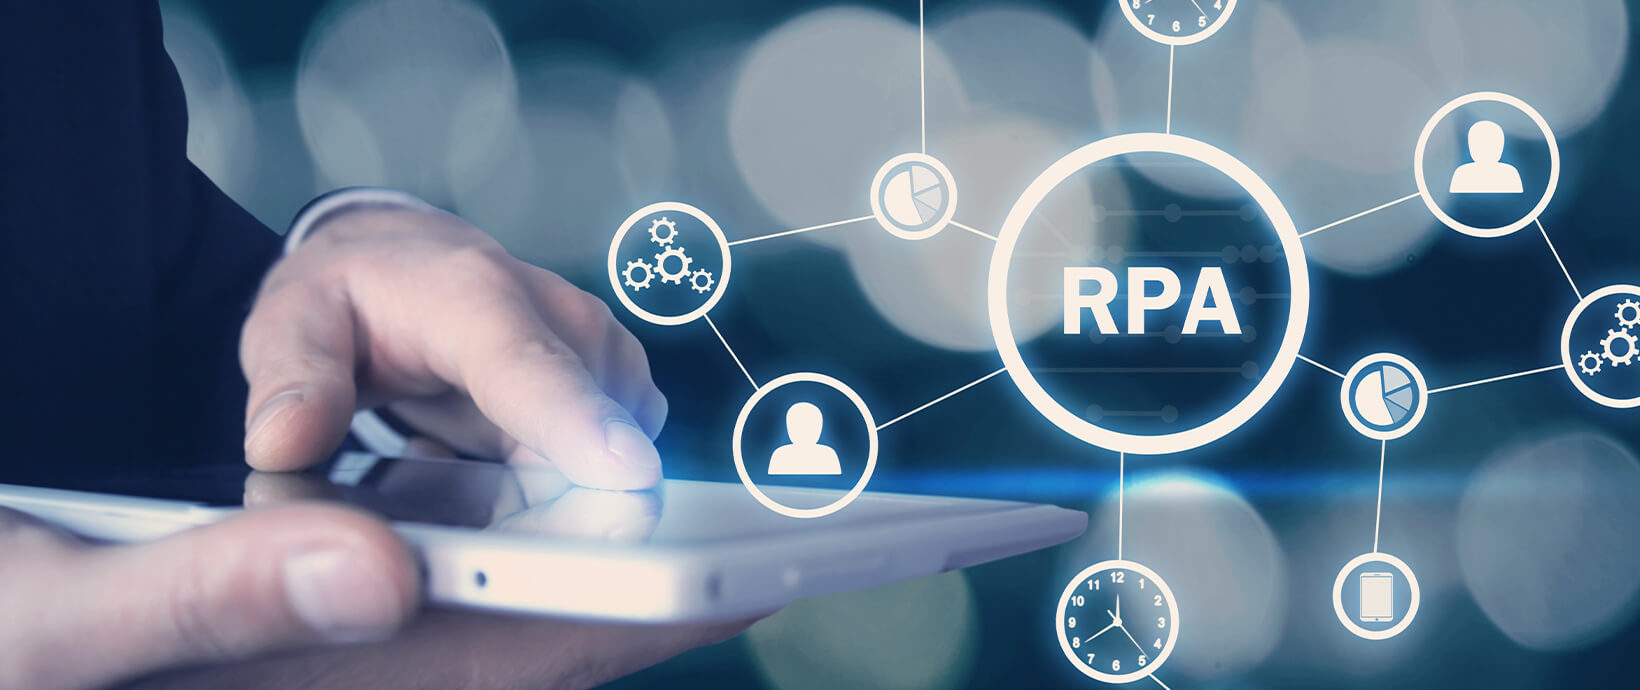 AmdoSoft Brings RPA to the Altair Partner Alliance